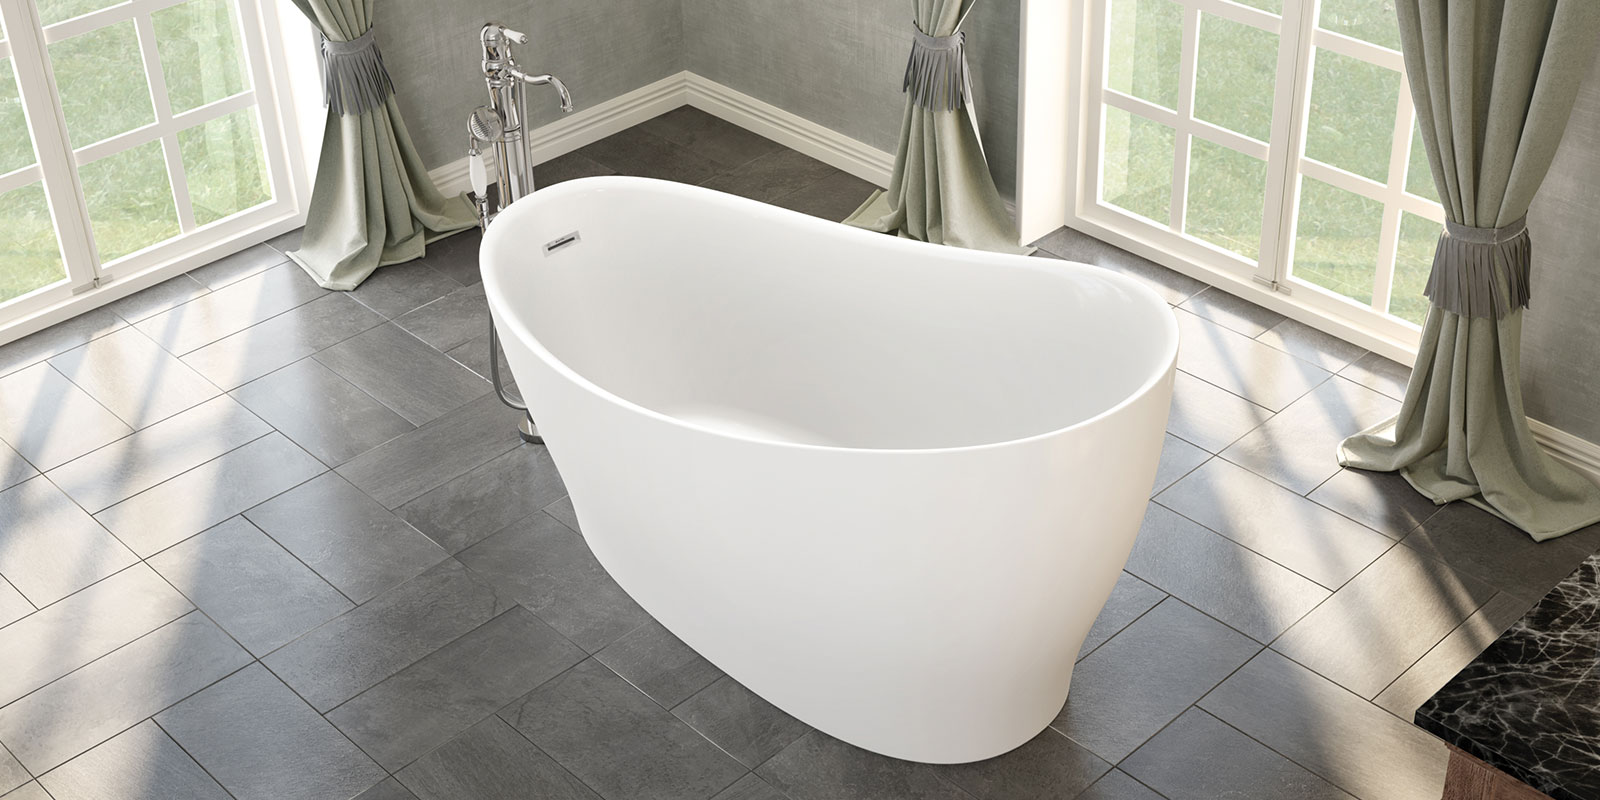 How Do You Secure a Freestanding Tub